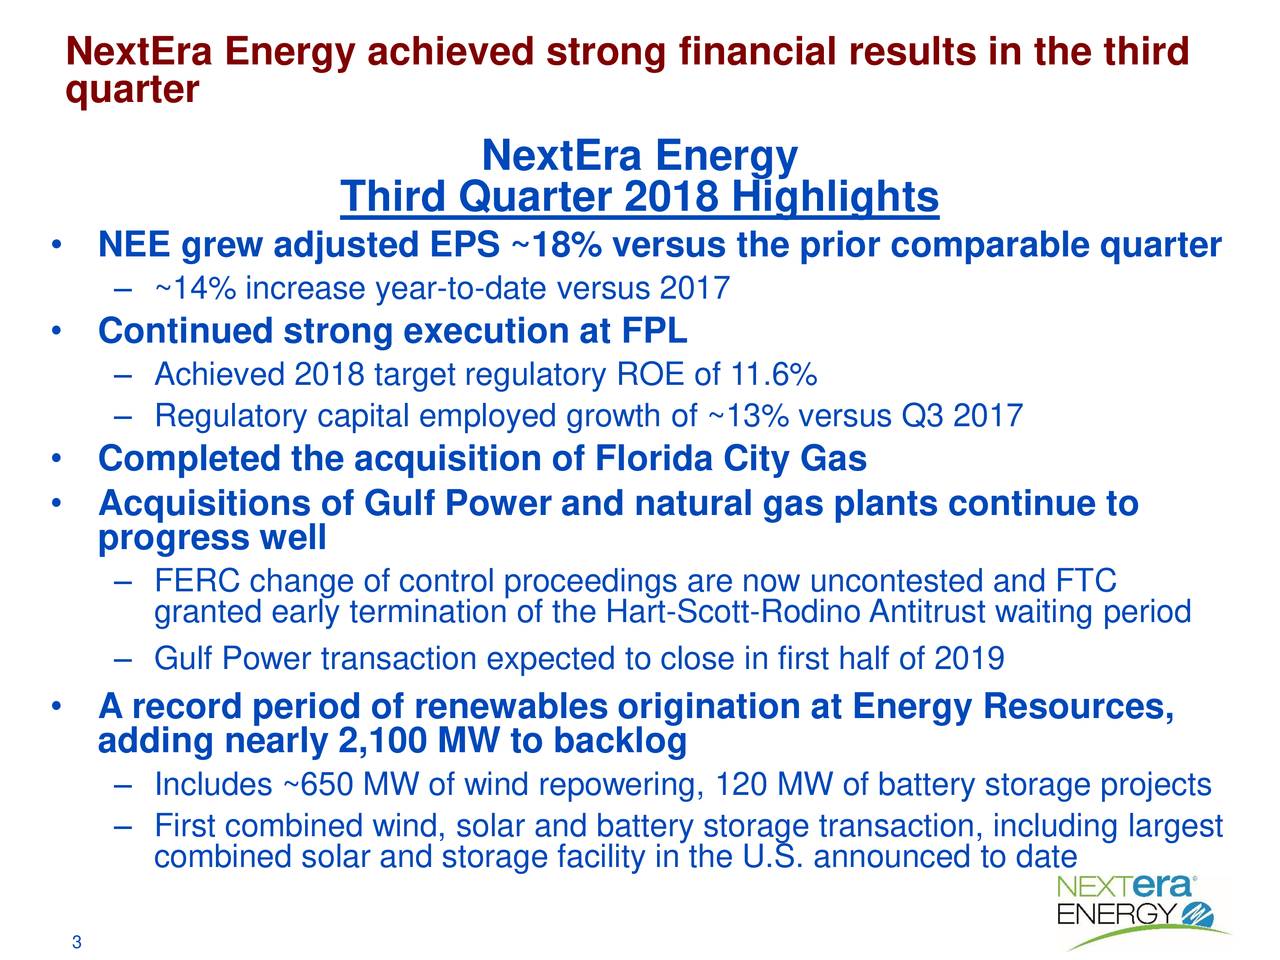 NextEra Energy achieved strong financial results in the third